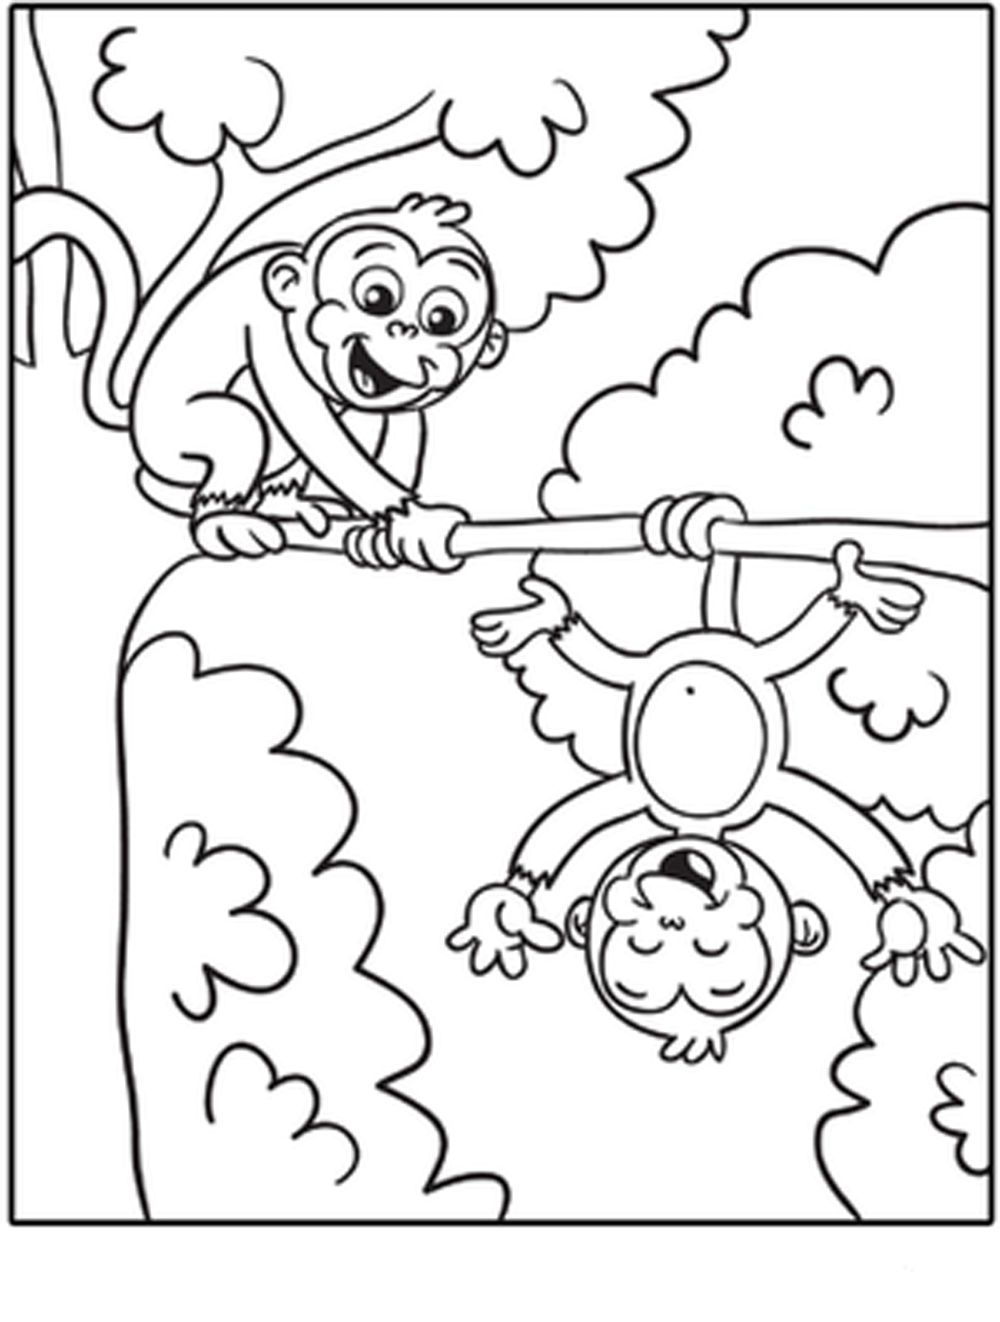 free-monkey-coloring-pages | Free Coloring Pages on Masivy World